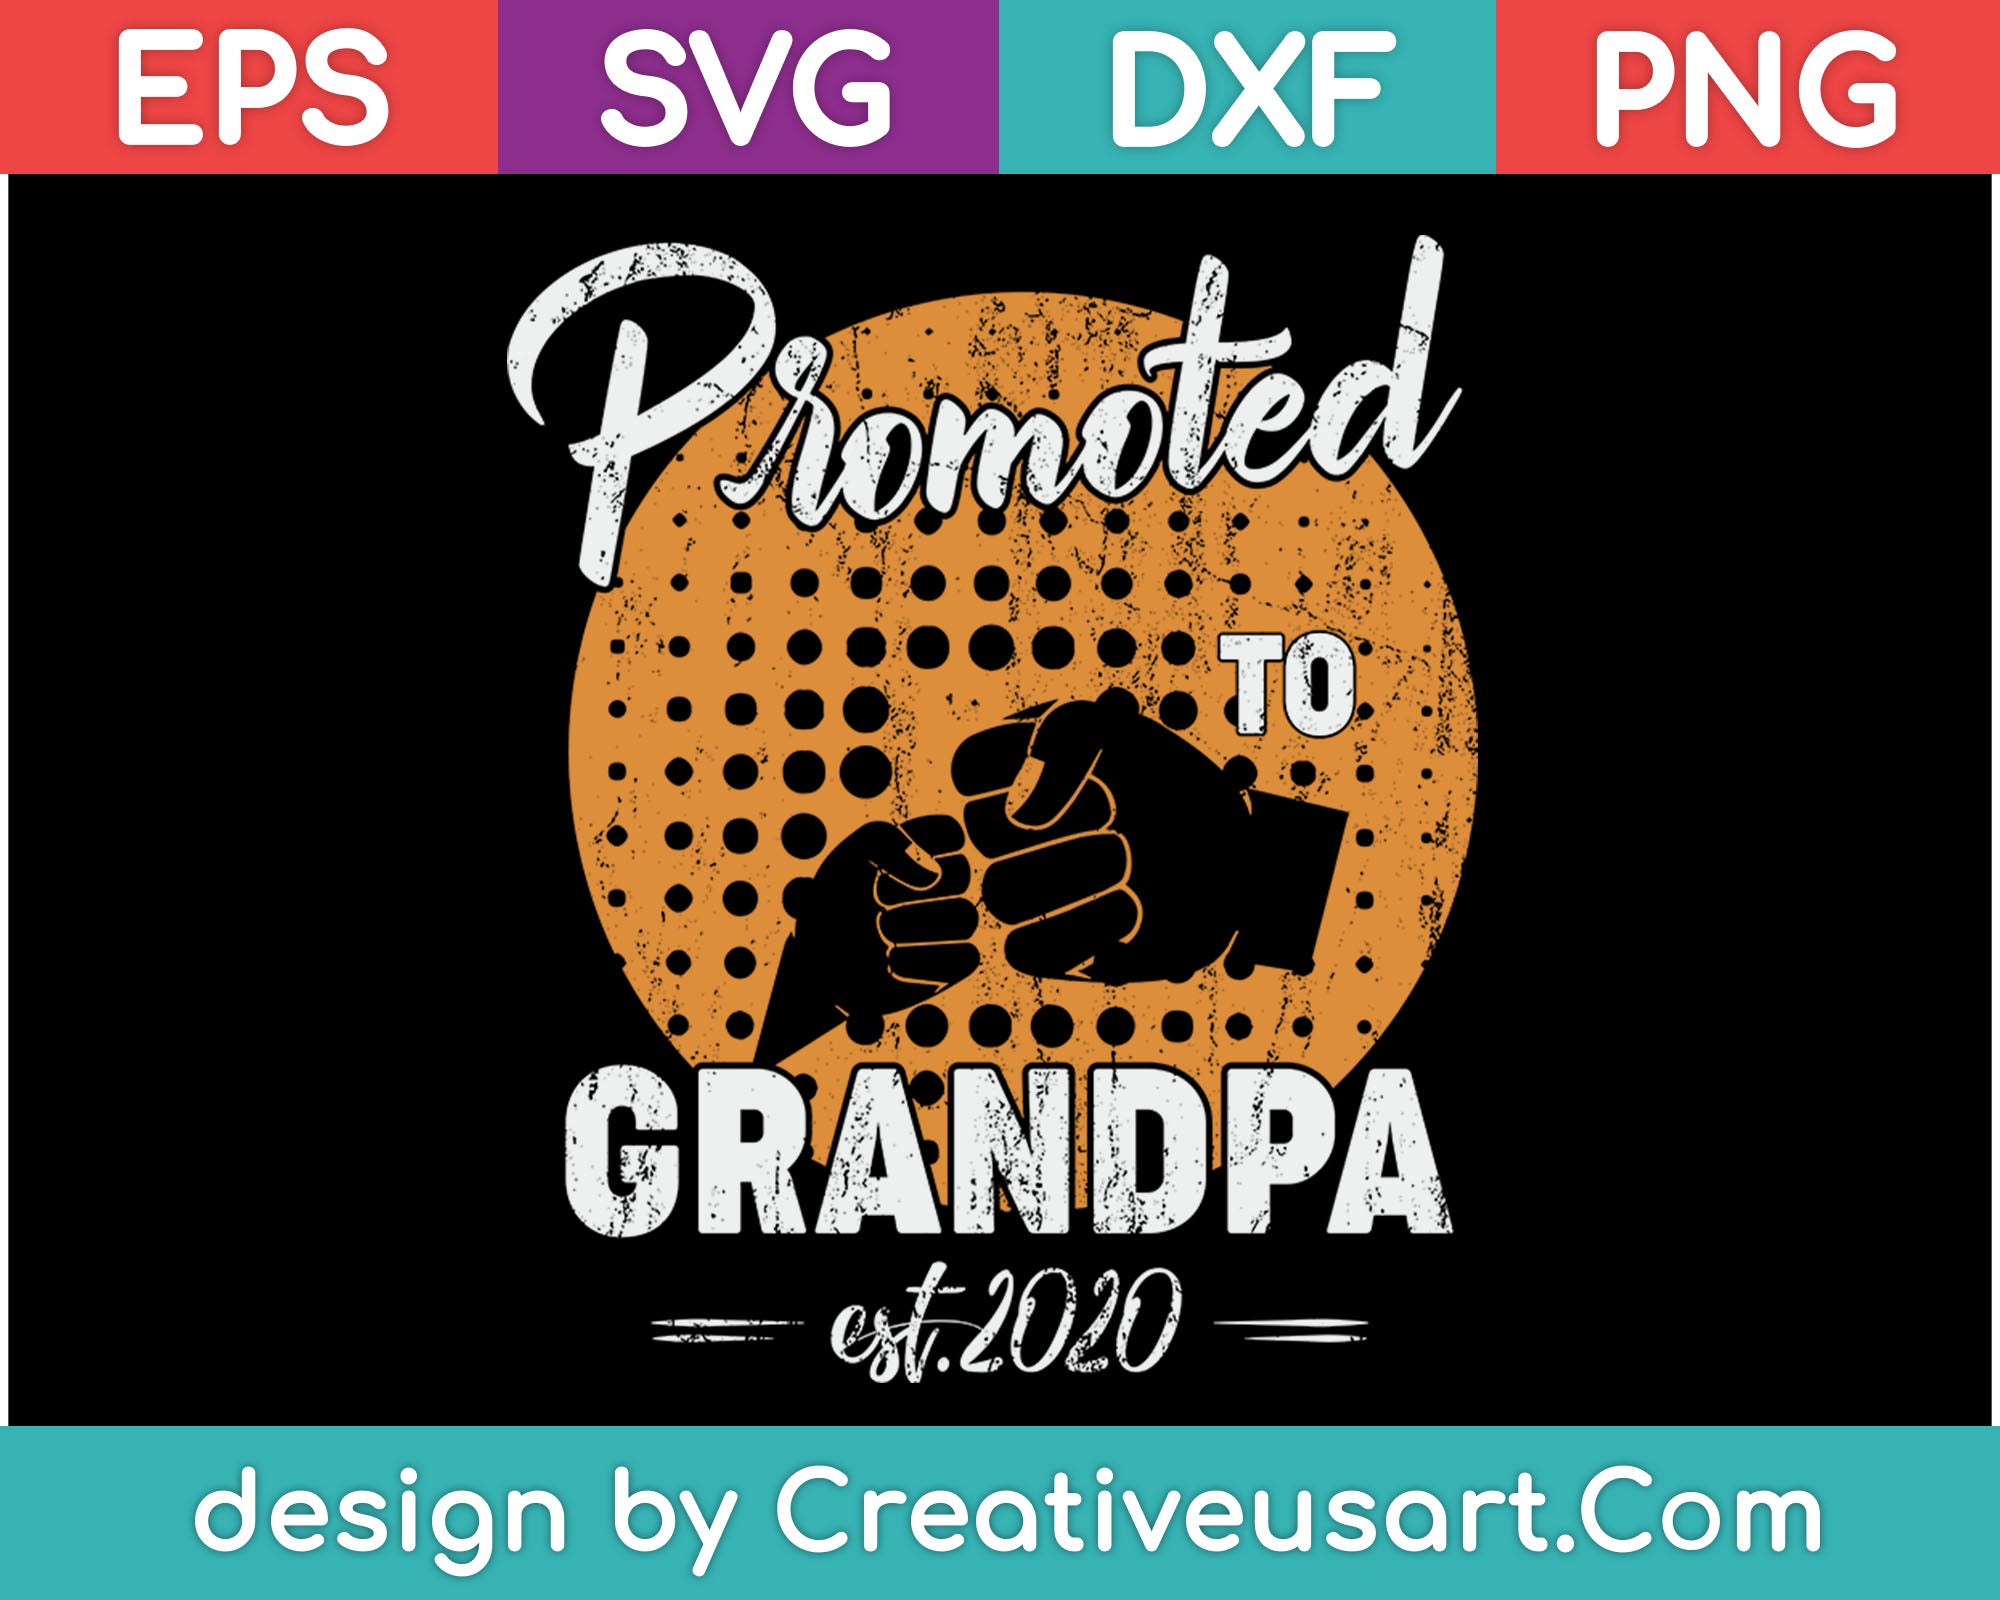 Download Promoted to Grandpa 2020 SVG Files - creativeusart